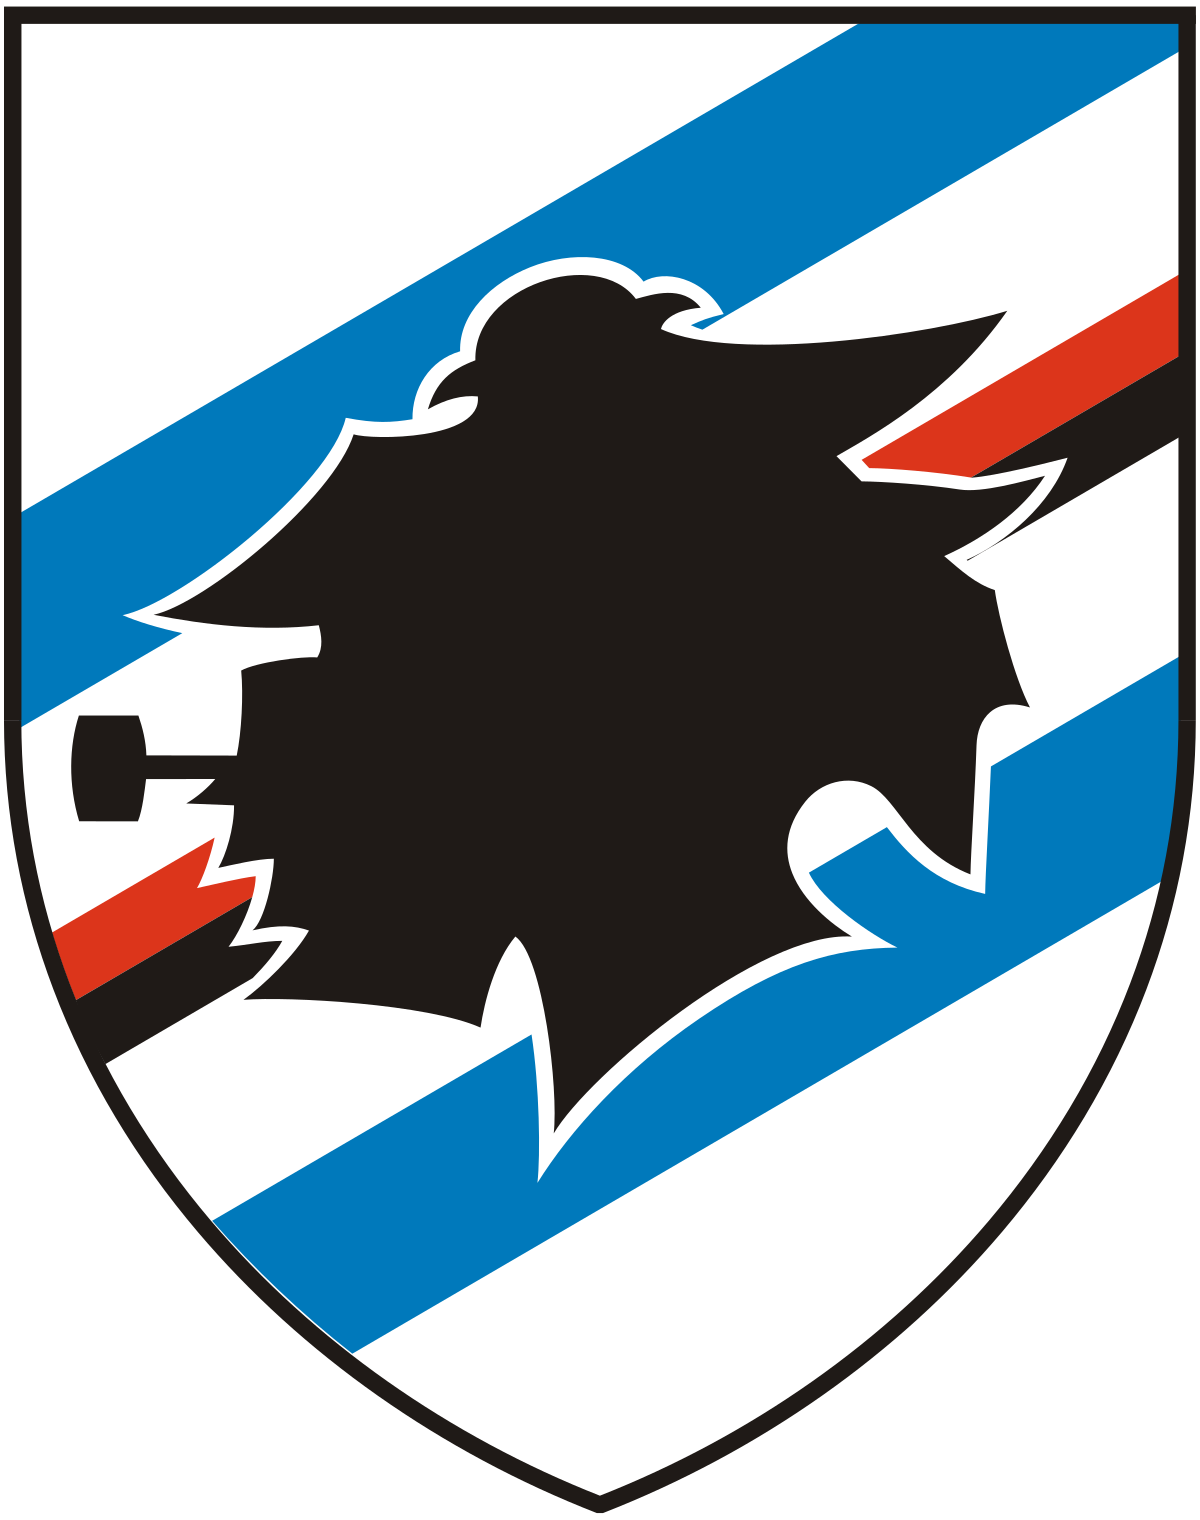 UC Sampdoria logo sports badges sport badges sporting badge embroidered sports patches football badges england football badge football badge wales football badge football badge creator football badge quiz football club badges football coaching badges football team badges wales badge football england badge football english football badges france football badge football poppy badges iran football badge brazil football badge football badge creator] football badge template football pin badges guess the football badge liverpool football badge scotland football badge welsh football badge football team badges